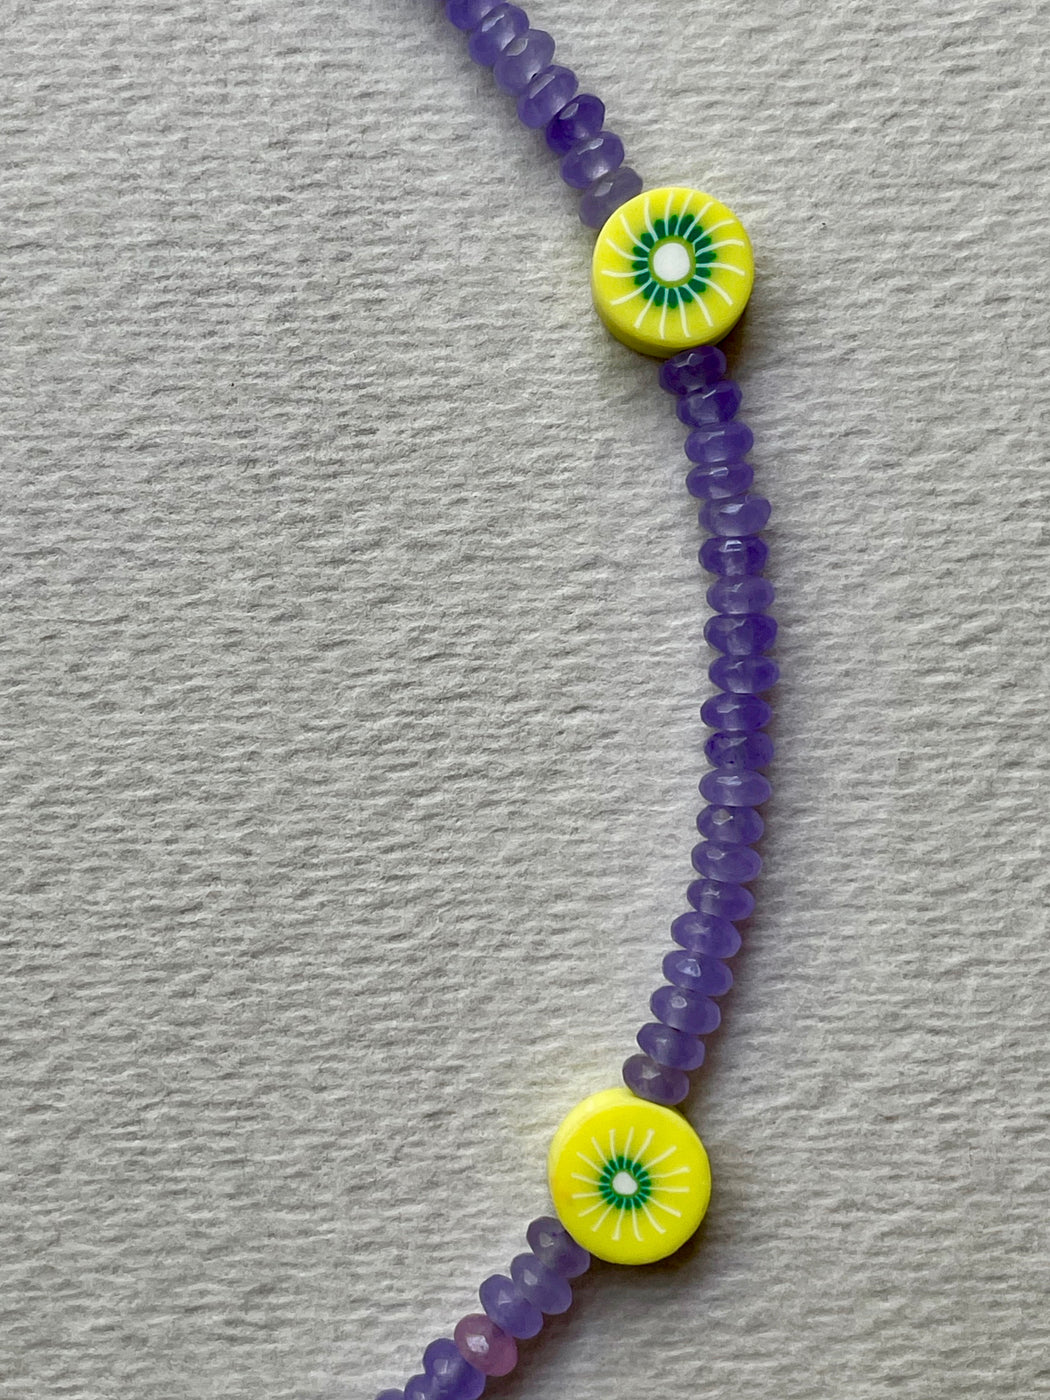 "Lavendar" Bead Necklace by Meredith Waterstraat